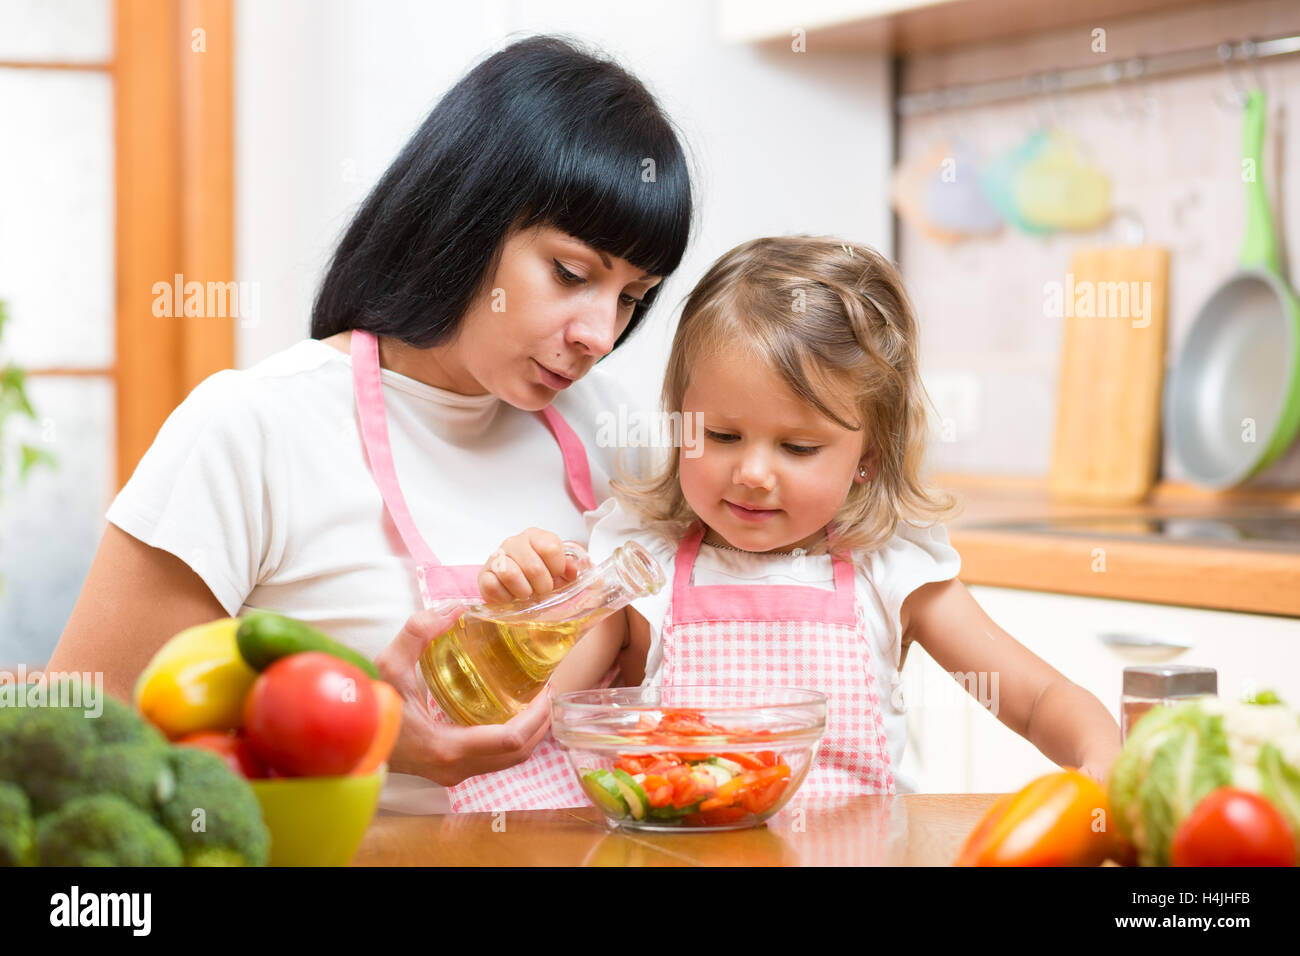 Mother teaching child making salad in kitchen. Cooking concept of happy family preparing food for dinner. Stock Photo